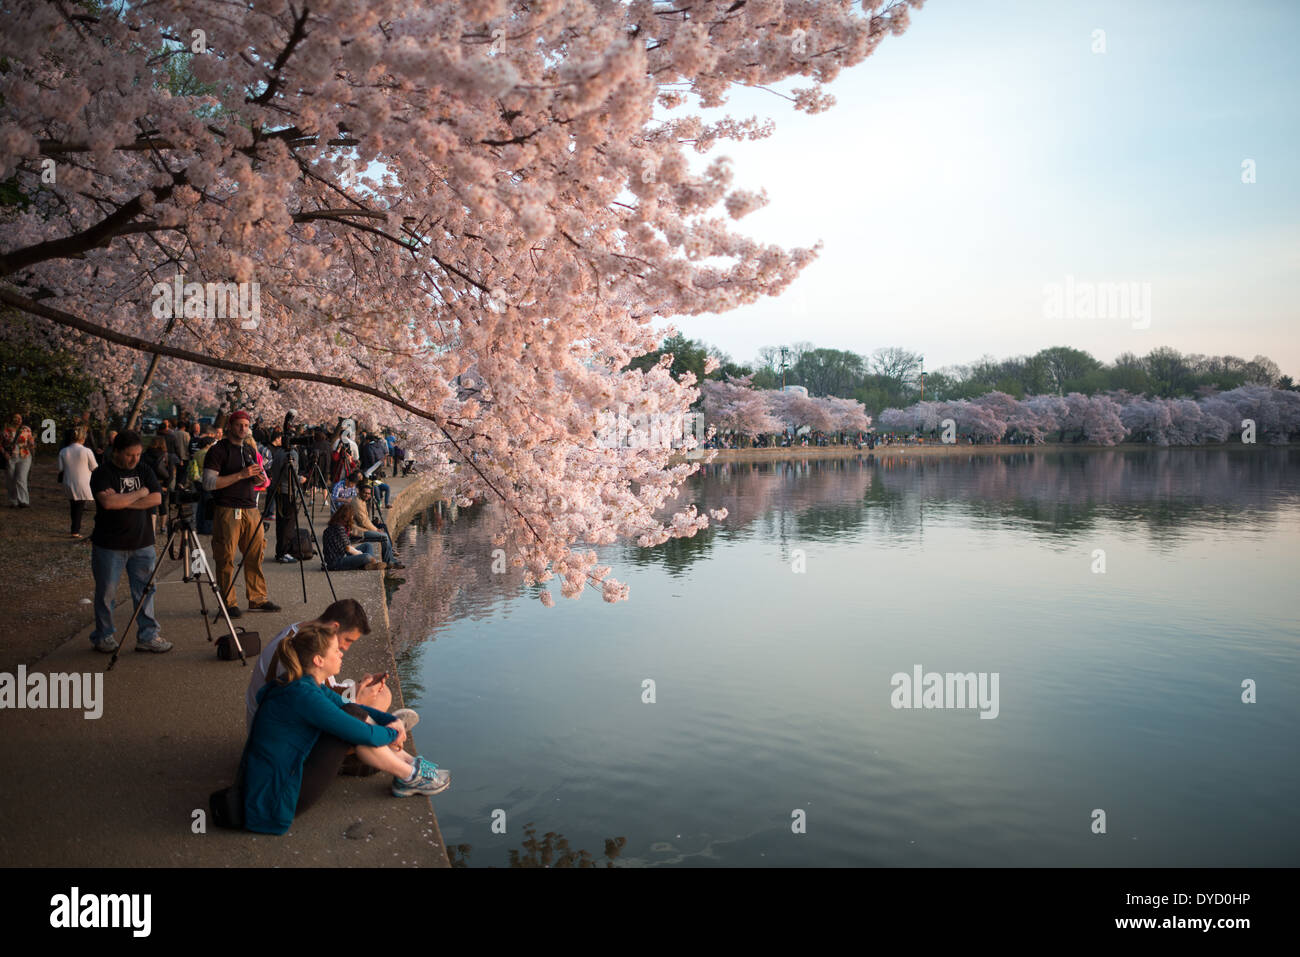 WASHINGTON DC, USA - Hundreds of thousands of tourists converge on Washington DC's Tidal Basin each spring for the annual blooming of the Yoshino cherry blossoms. The oldest of the trees were planted as a gift from Japan in 1912. Stock Photo